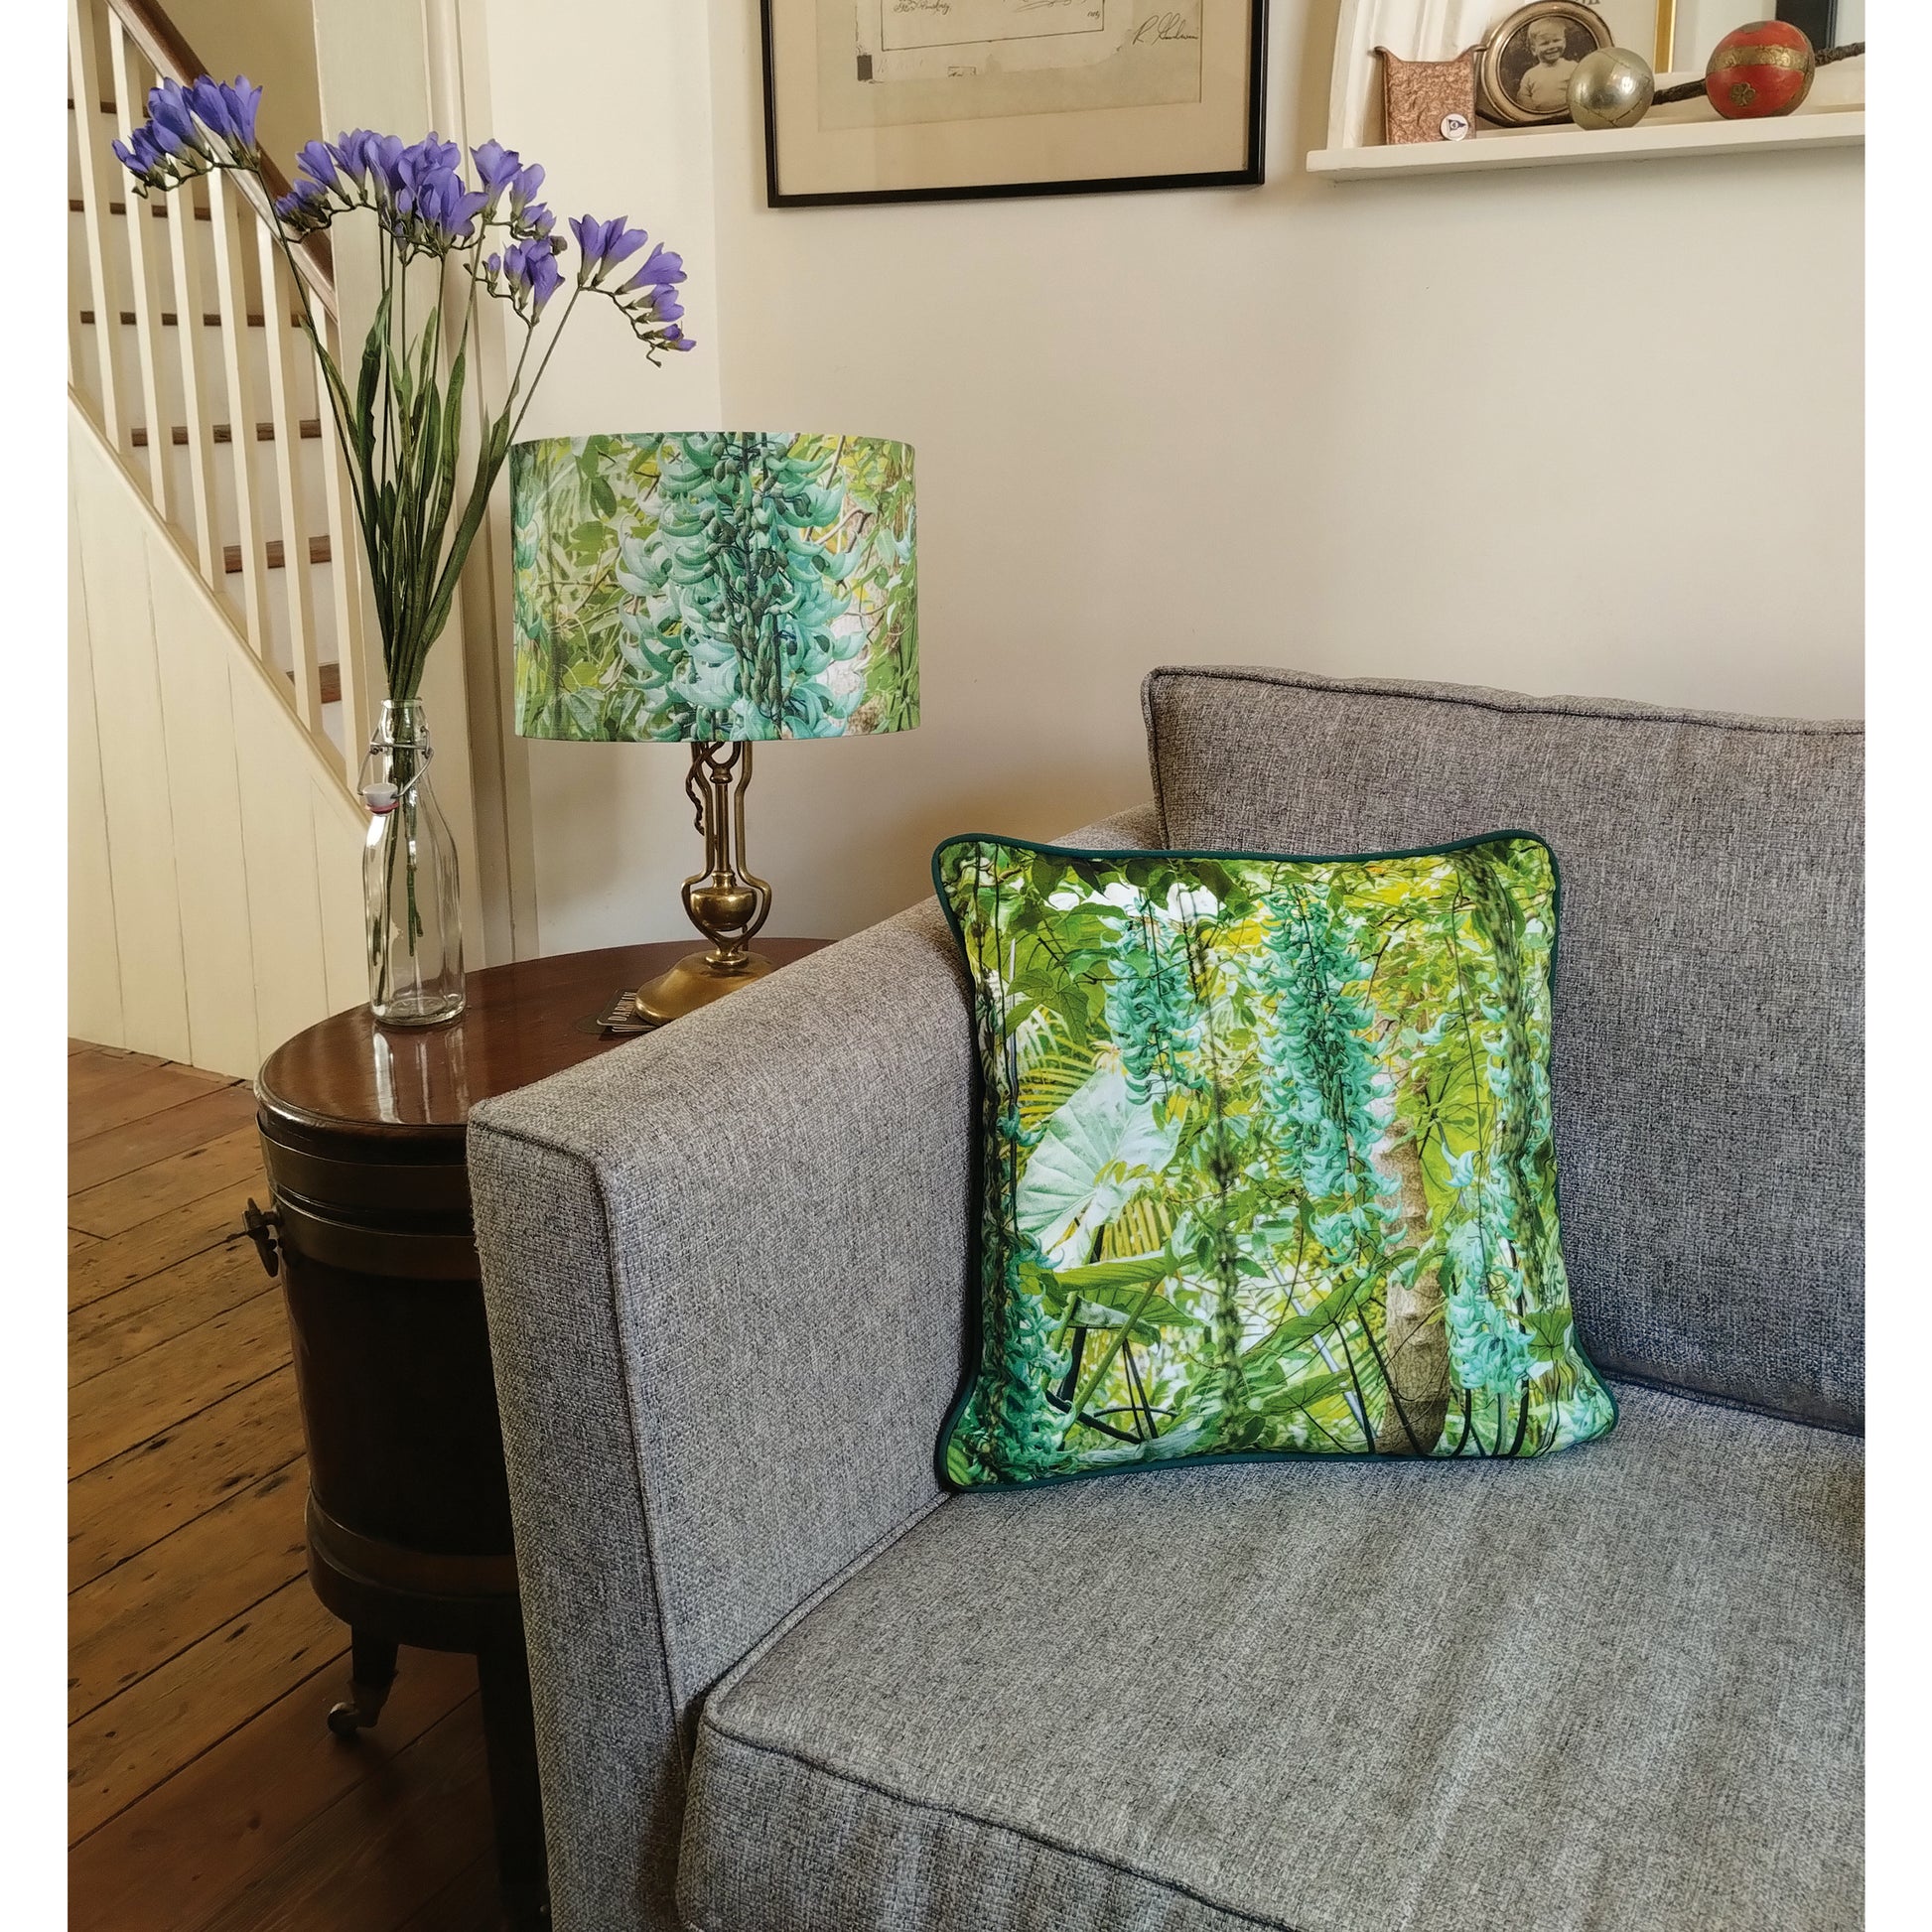 Cushion with Jade Vine design from the Cambridge University Botanic Gardens in domestic setting.